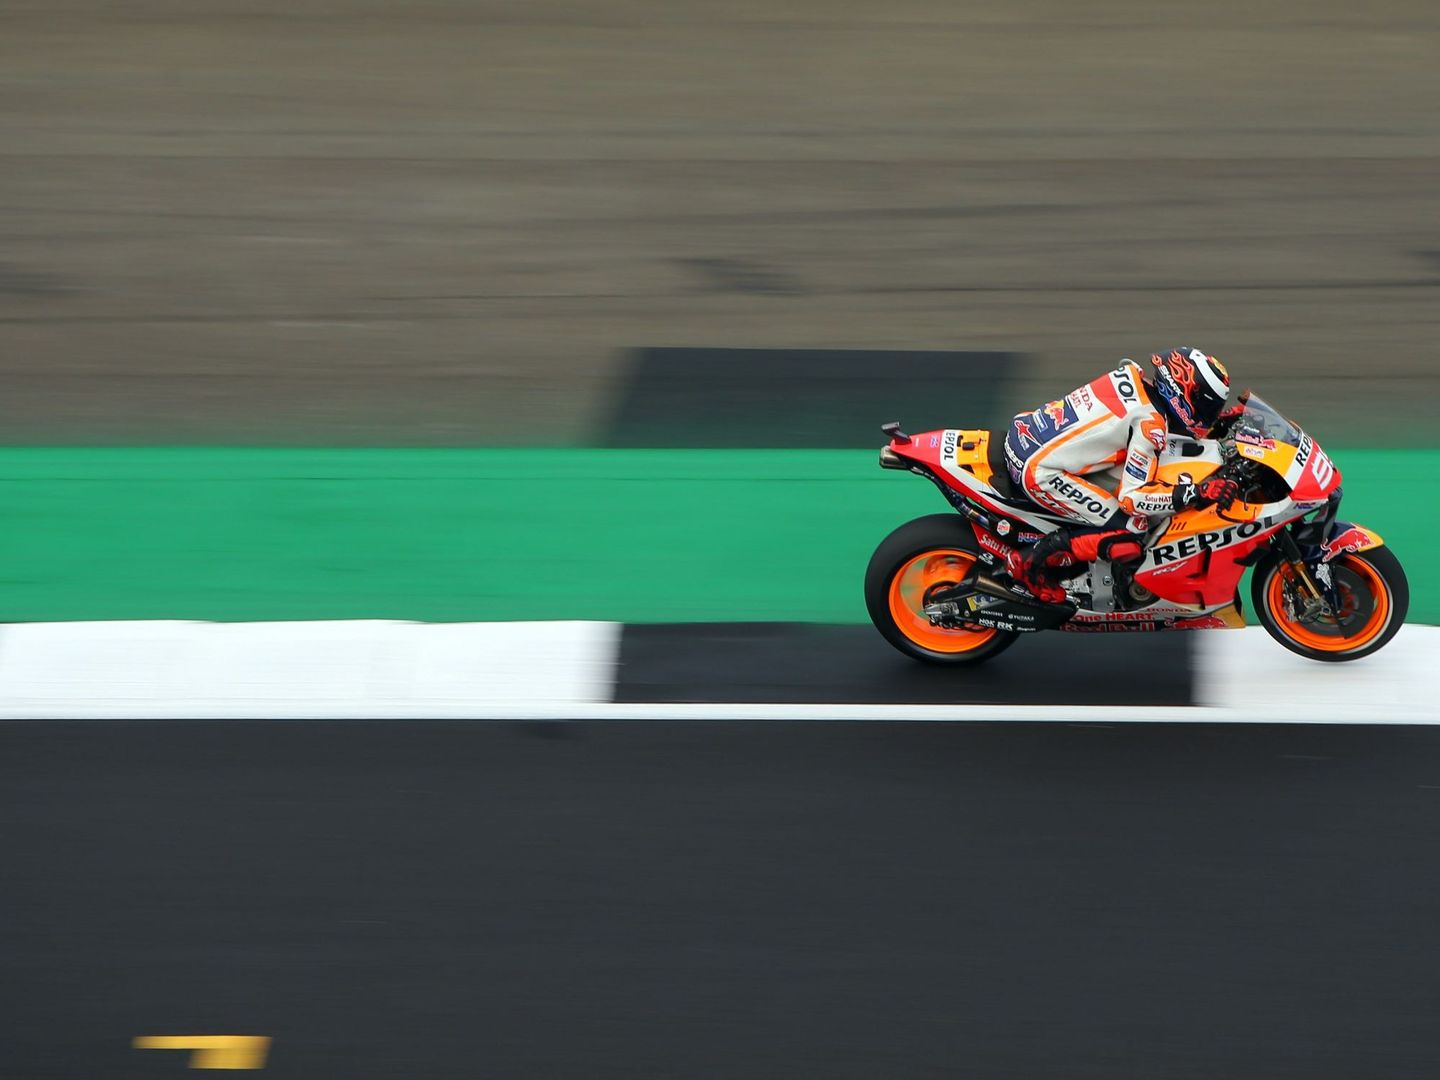 Northampton (United Kingdom), 23 08 2019.- Spanish MotoGP rider Jorge Lorenzo of Repsol Honda Team in action during the free practice session of the 2019 Motorcycling Grand Prix of Britain at the Silverstone race track, Northampton, Britain, 23 August 2019. (Motociclismo, Ciclismo, Reino Unido) EFE EPA TIM KEETON